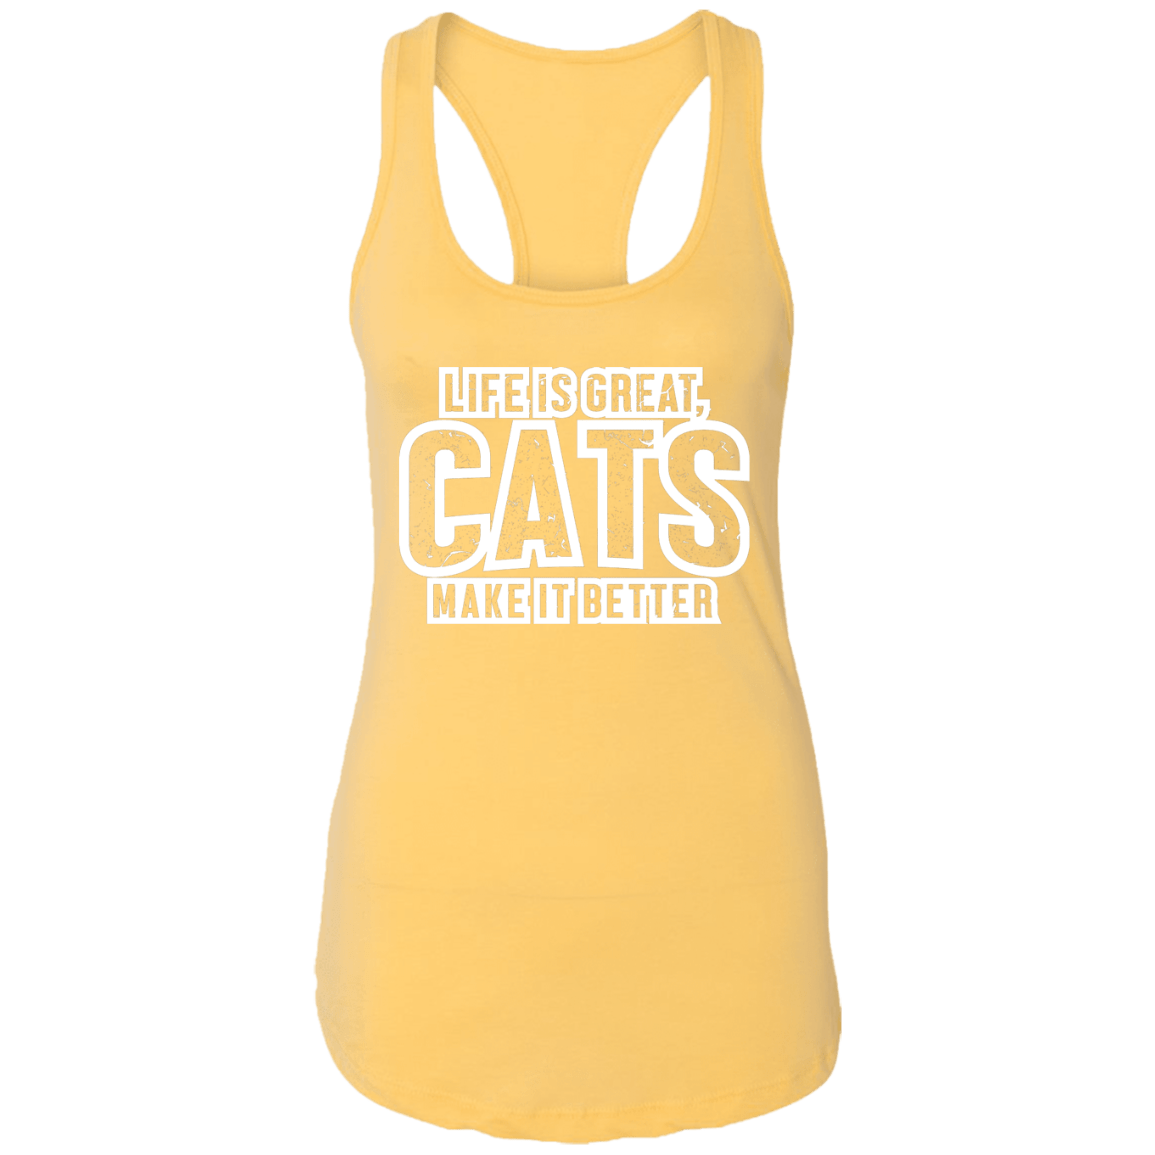 Life Is Great Cats - Ladies Racer Back Tank.